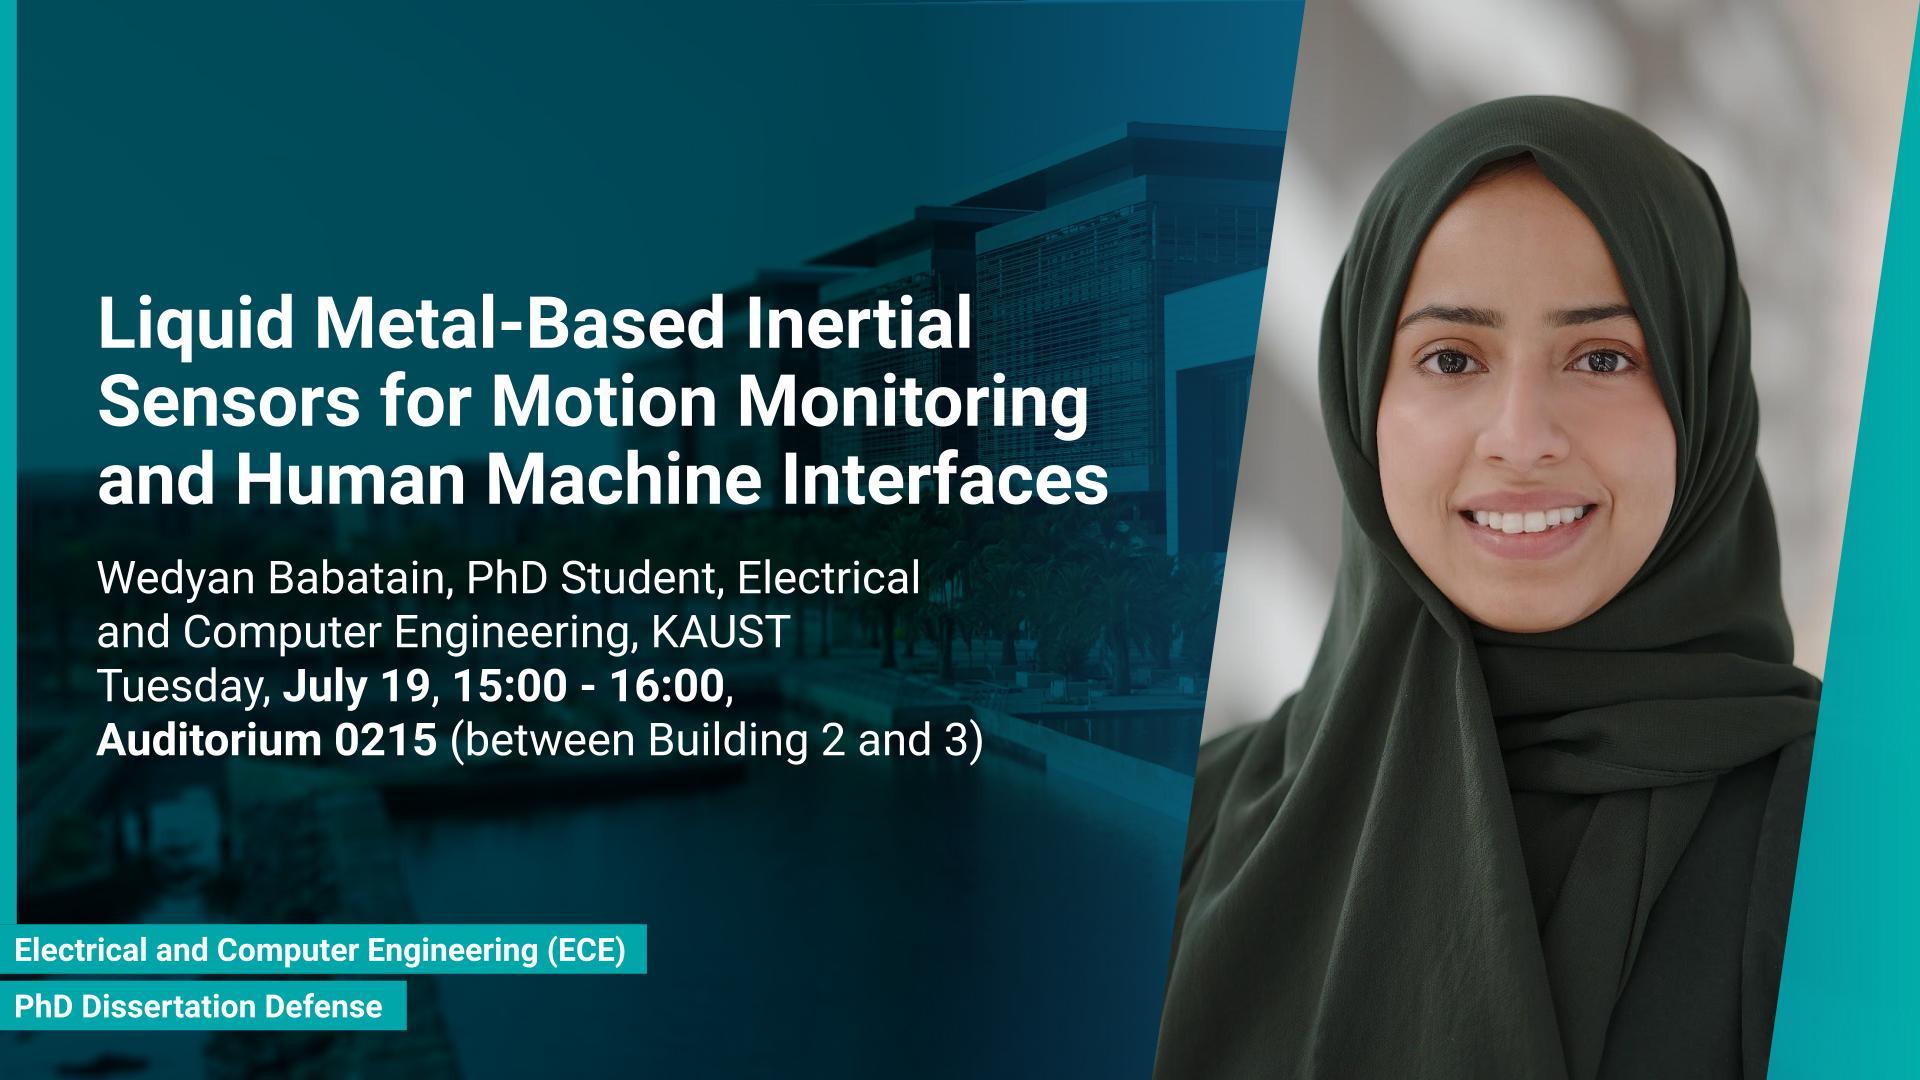 KAUST CEMSE ECE Wedyan Babatain PhD Dissertation Defense Liquid Metal-Based Inertial Sensors for Motion Monitoring and Human Machine Interfaces